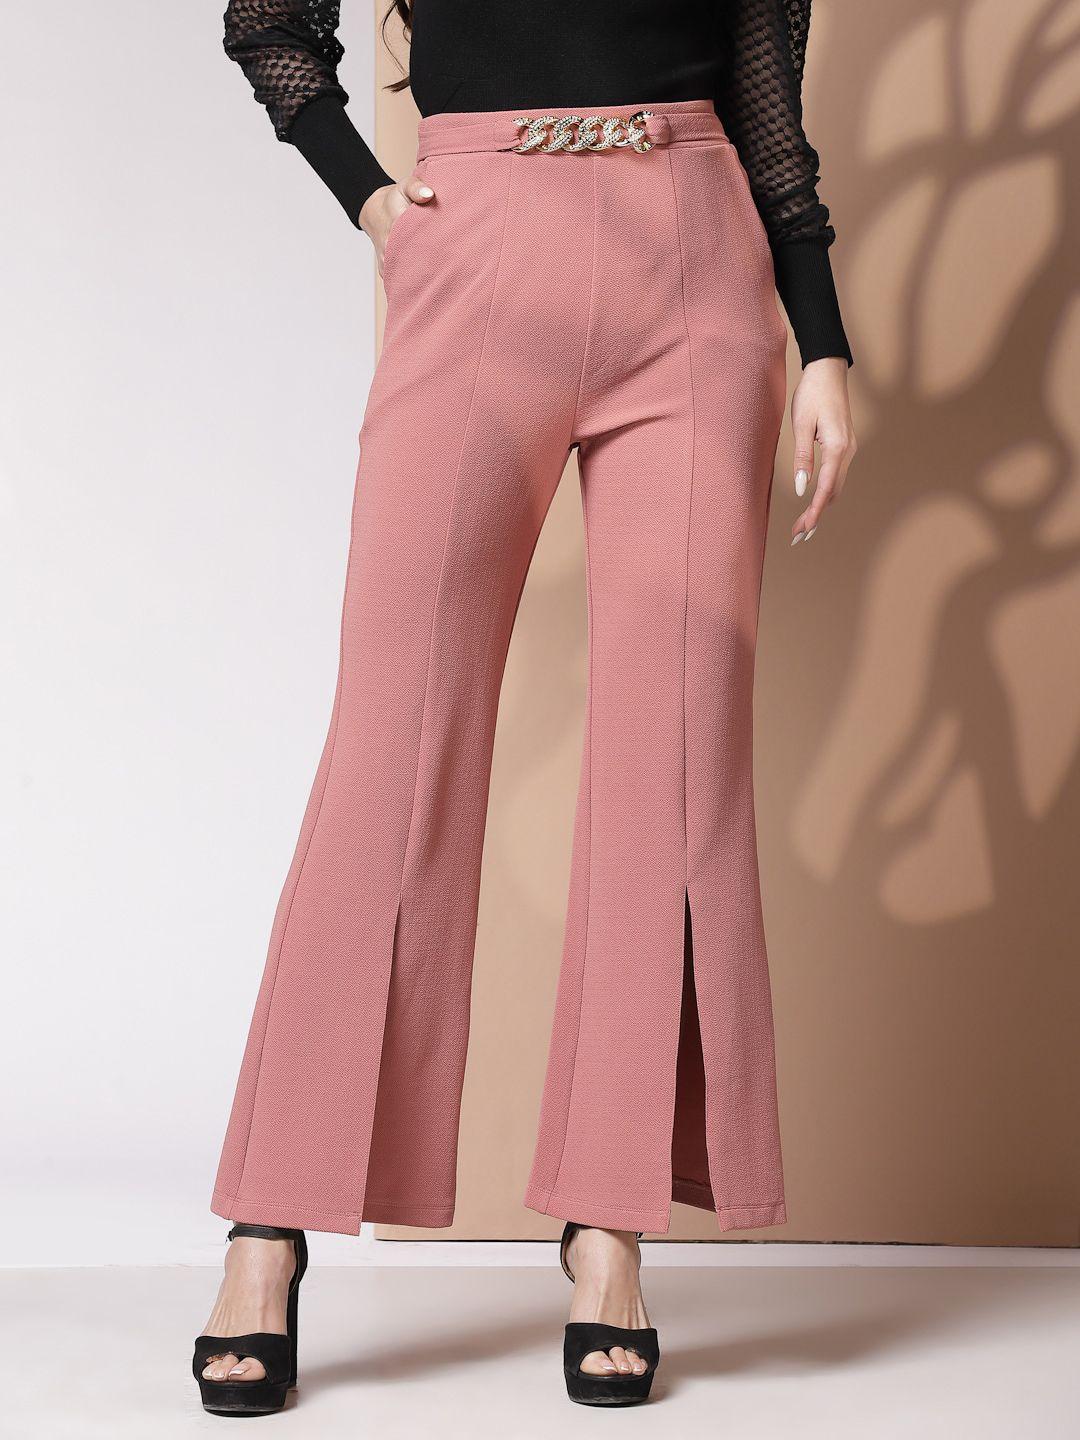 kassually women flared high-rise trousers